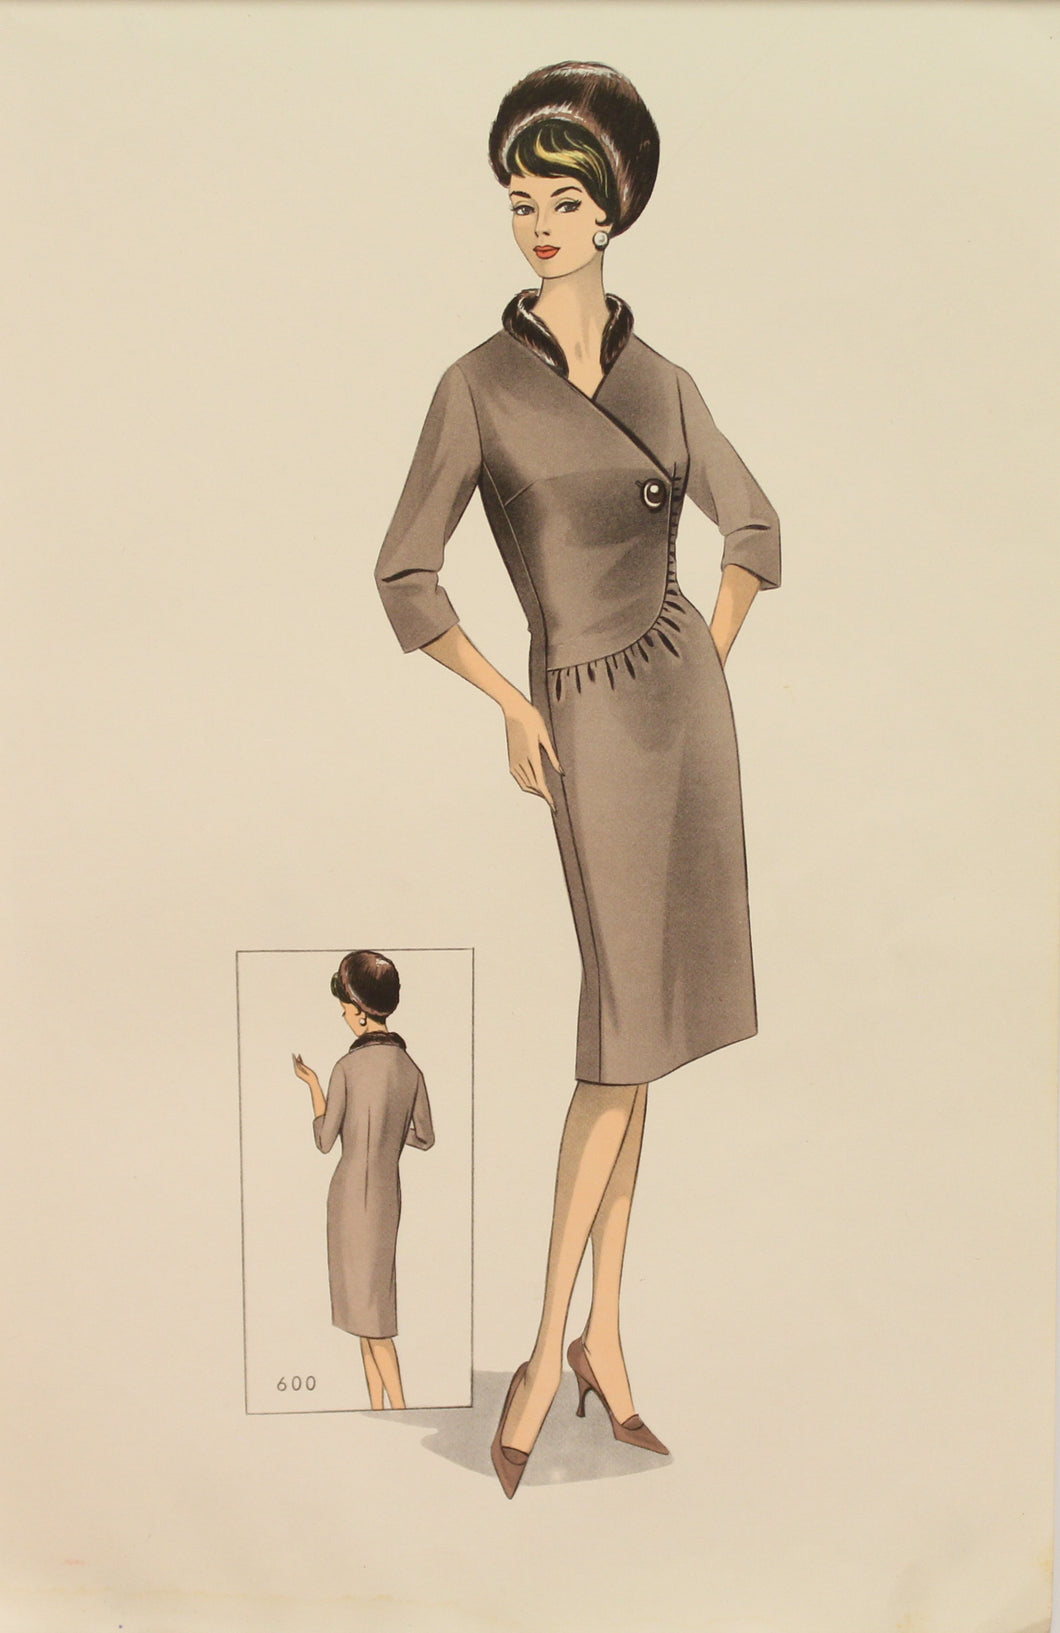 Fashion of the 60s, New Lines from the Fashions in Vienna, Mode Studio, 600, 1965